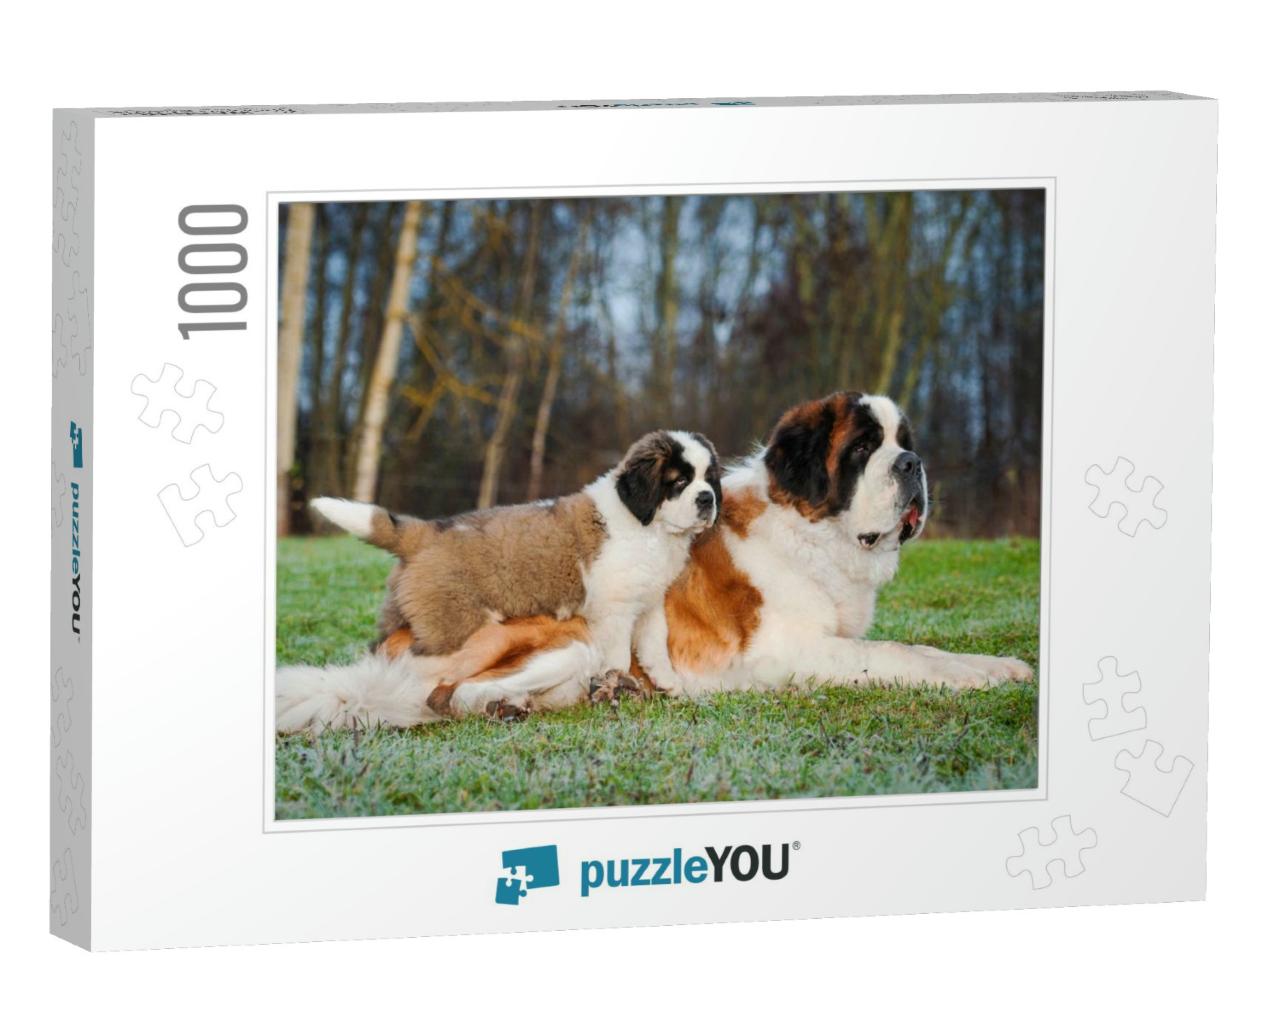 Adult & Young Saint Bernard Dogs... Jigsaw Puzzle with 1000 pieces